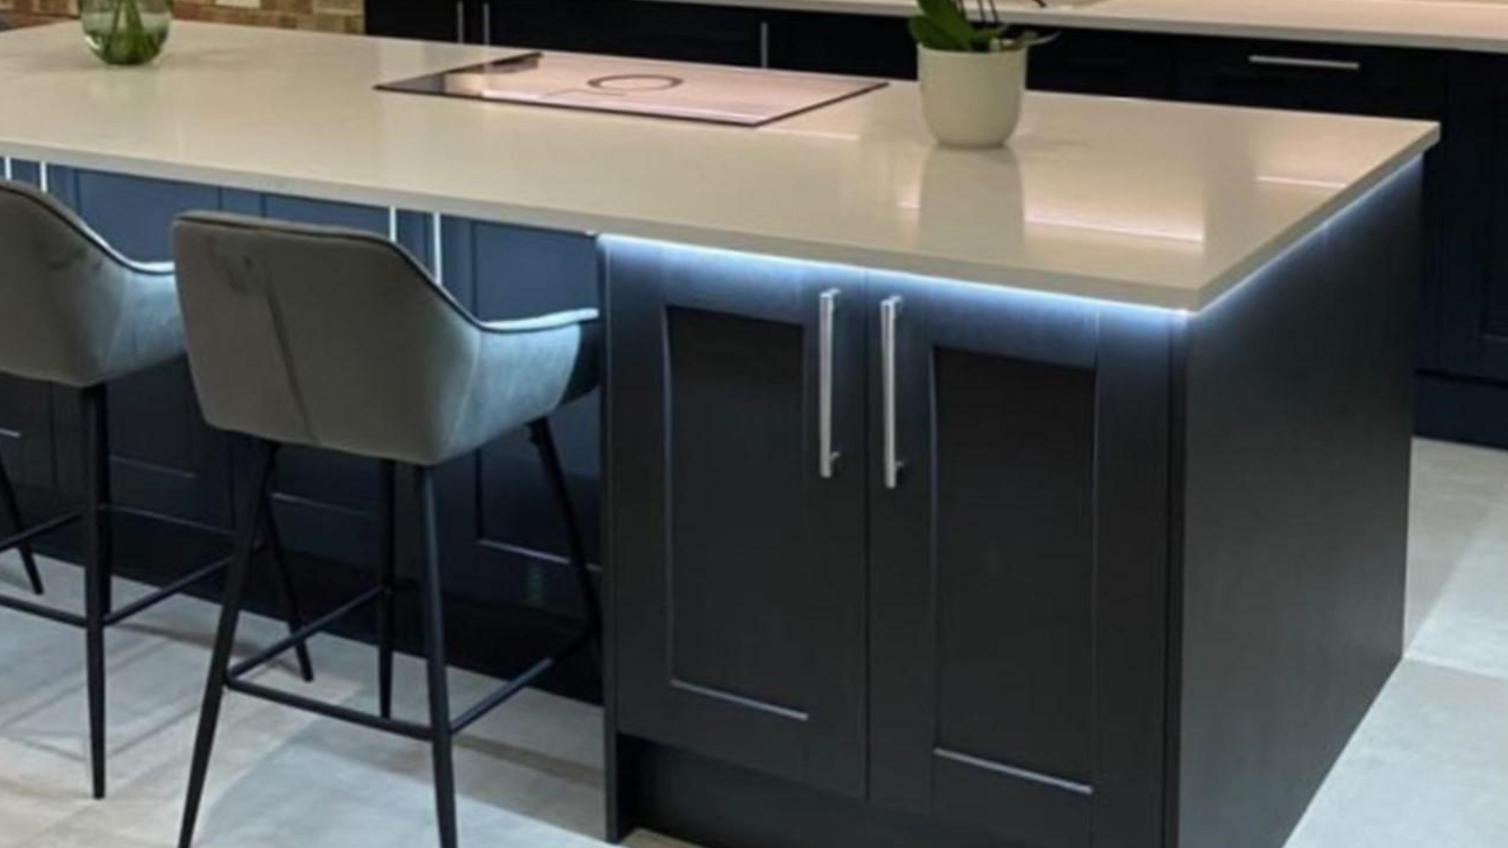 Fairford charcoal black kitchen island with matching base cabinets and dove grey wall cabinets. The island has a quartz worktop.